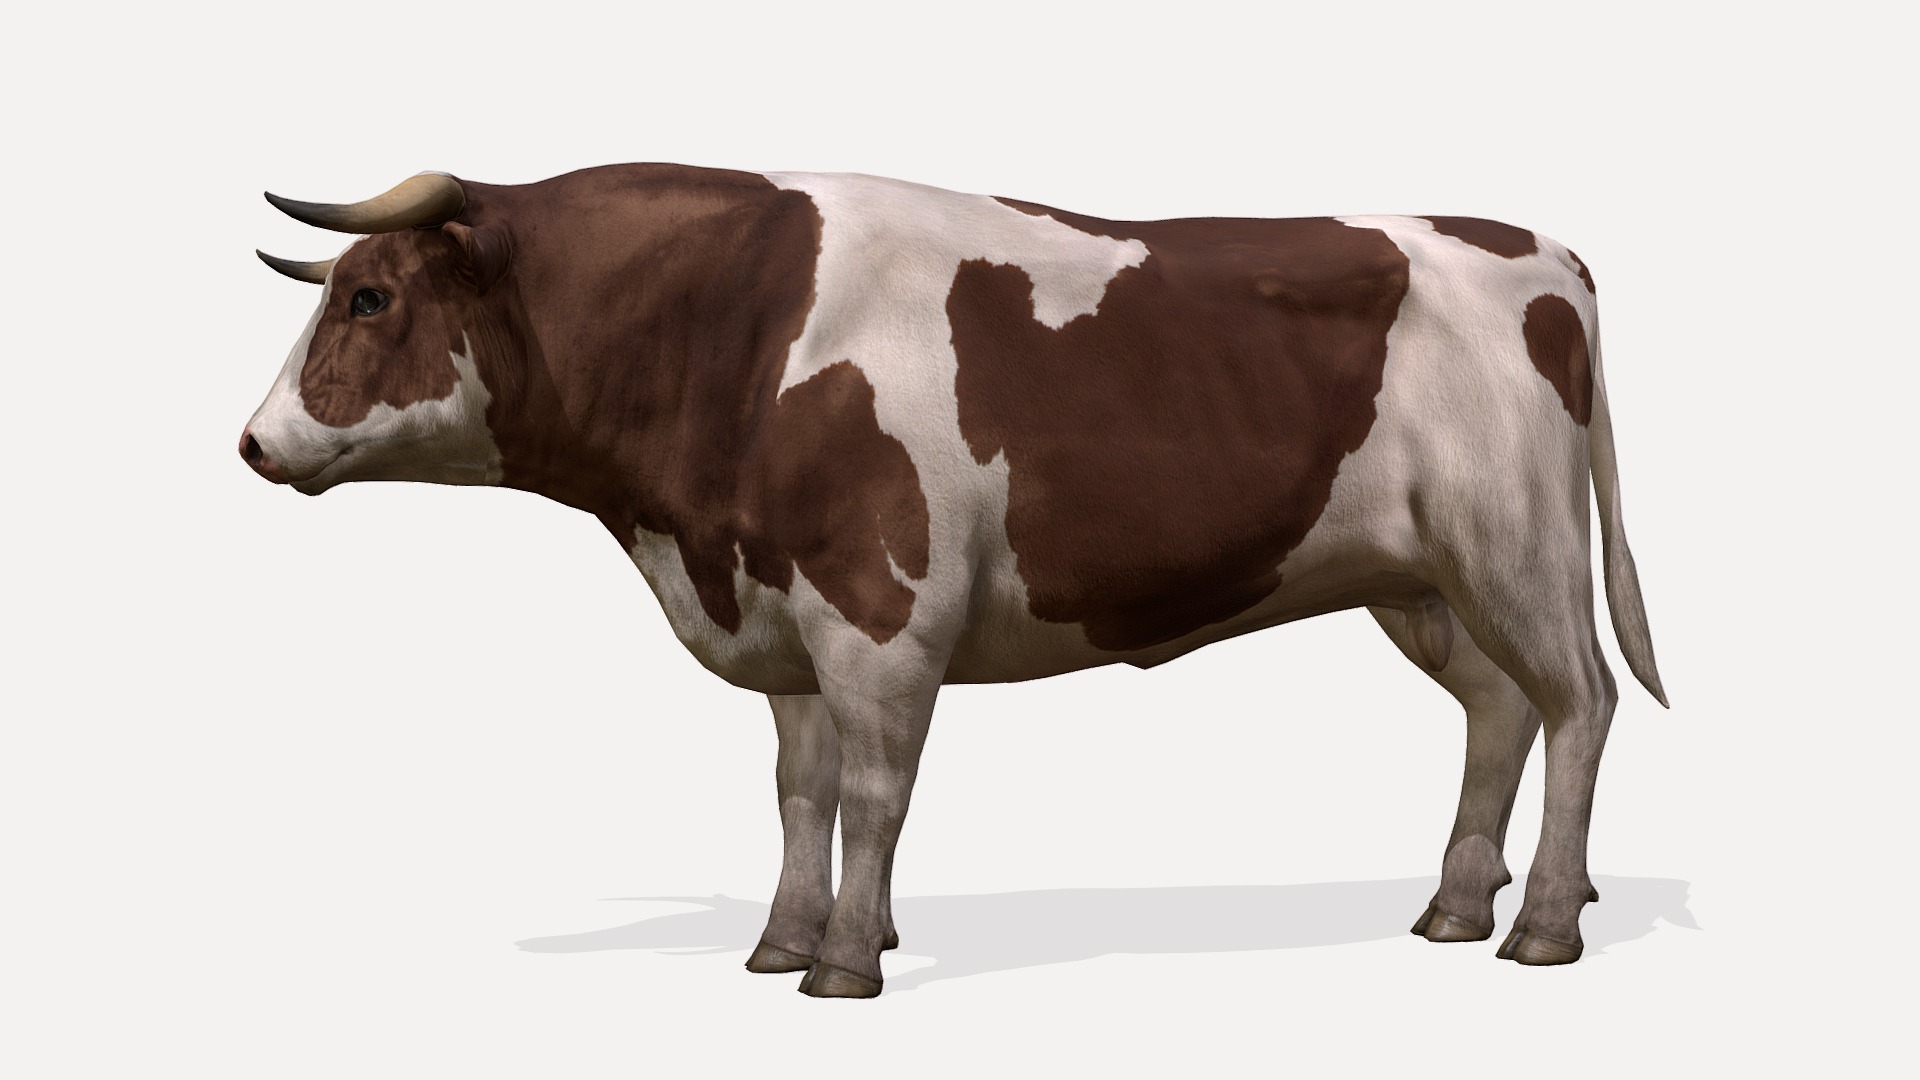 3D model Bull Animations - This is a 3D model of the Bull Animations. The 3D model is about a brown and white cow.